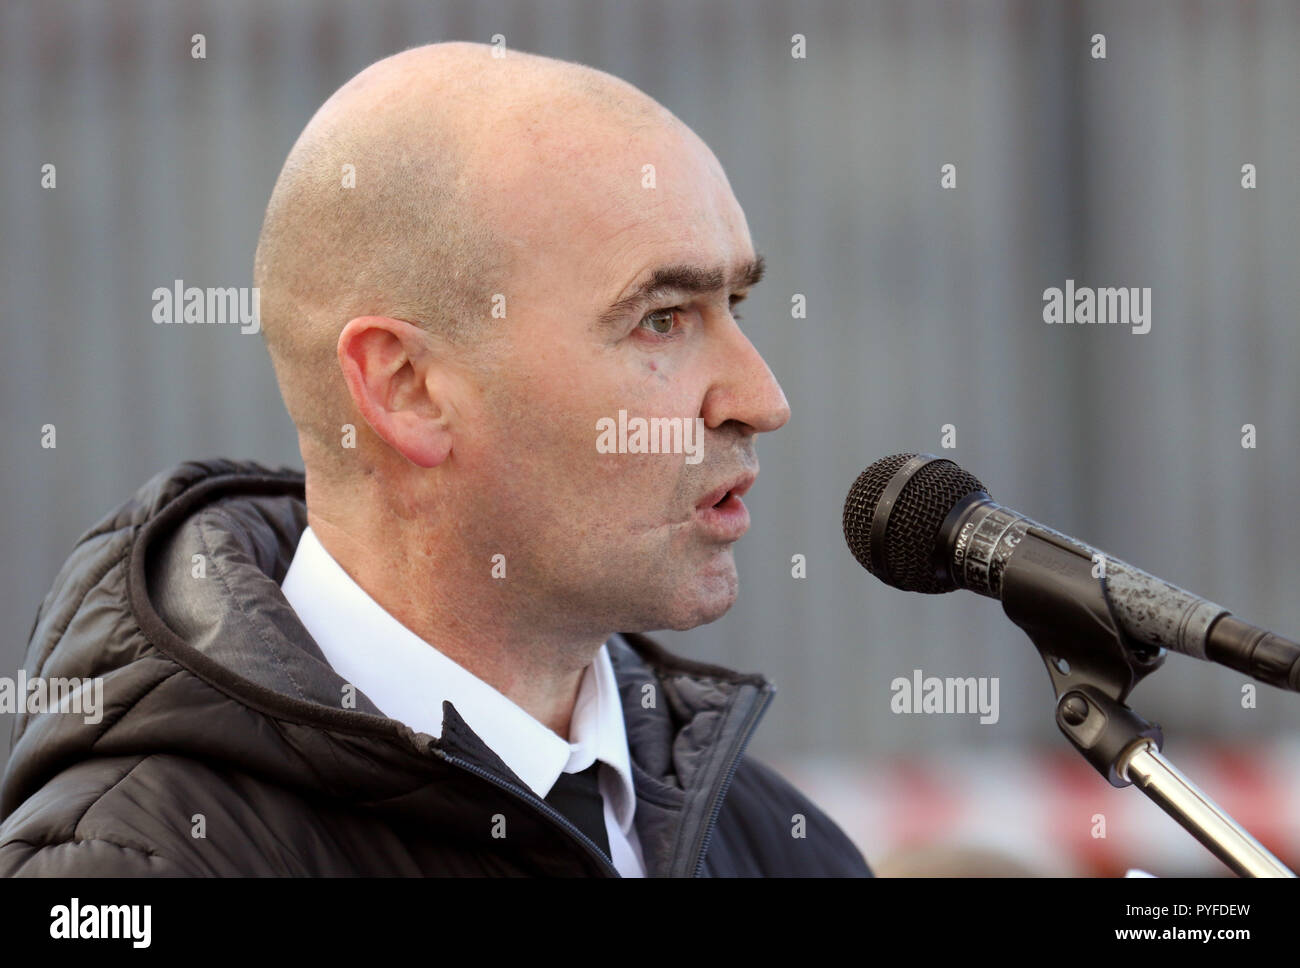 IRA killer Sean Kelly speaks during a controversial commemoration at Milltown Cemetery in west Belfast for his fellow Shankill Road bomber Thomas Begley, who died alongside the nine victims of the 1993 attack. Stock Photo